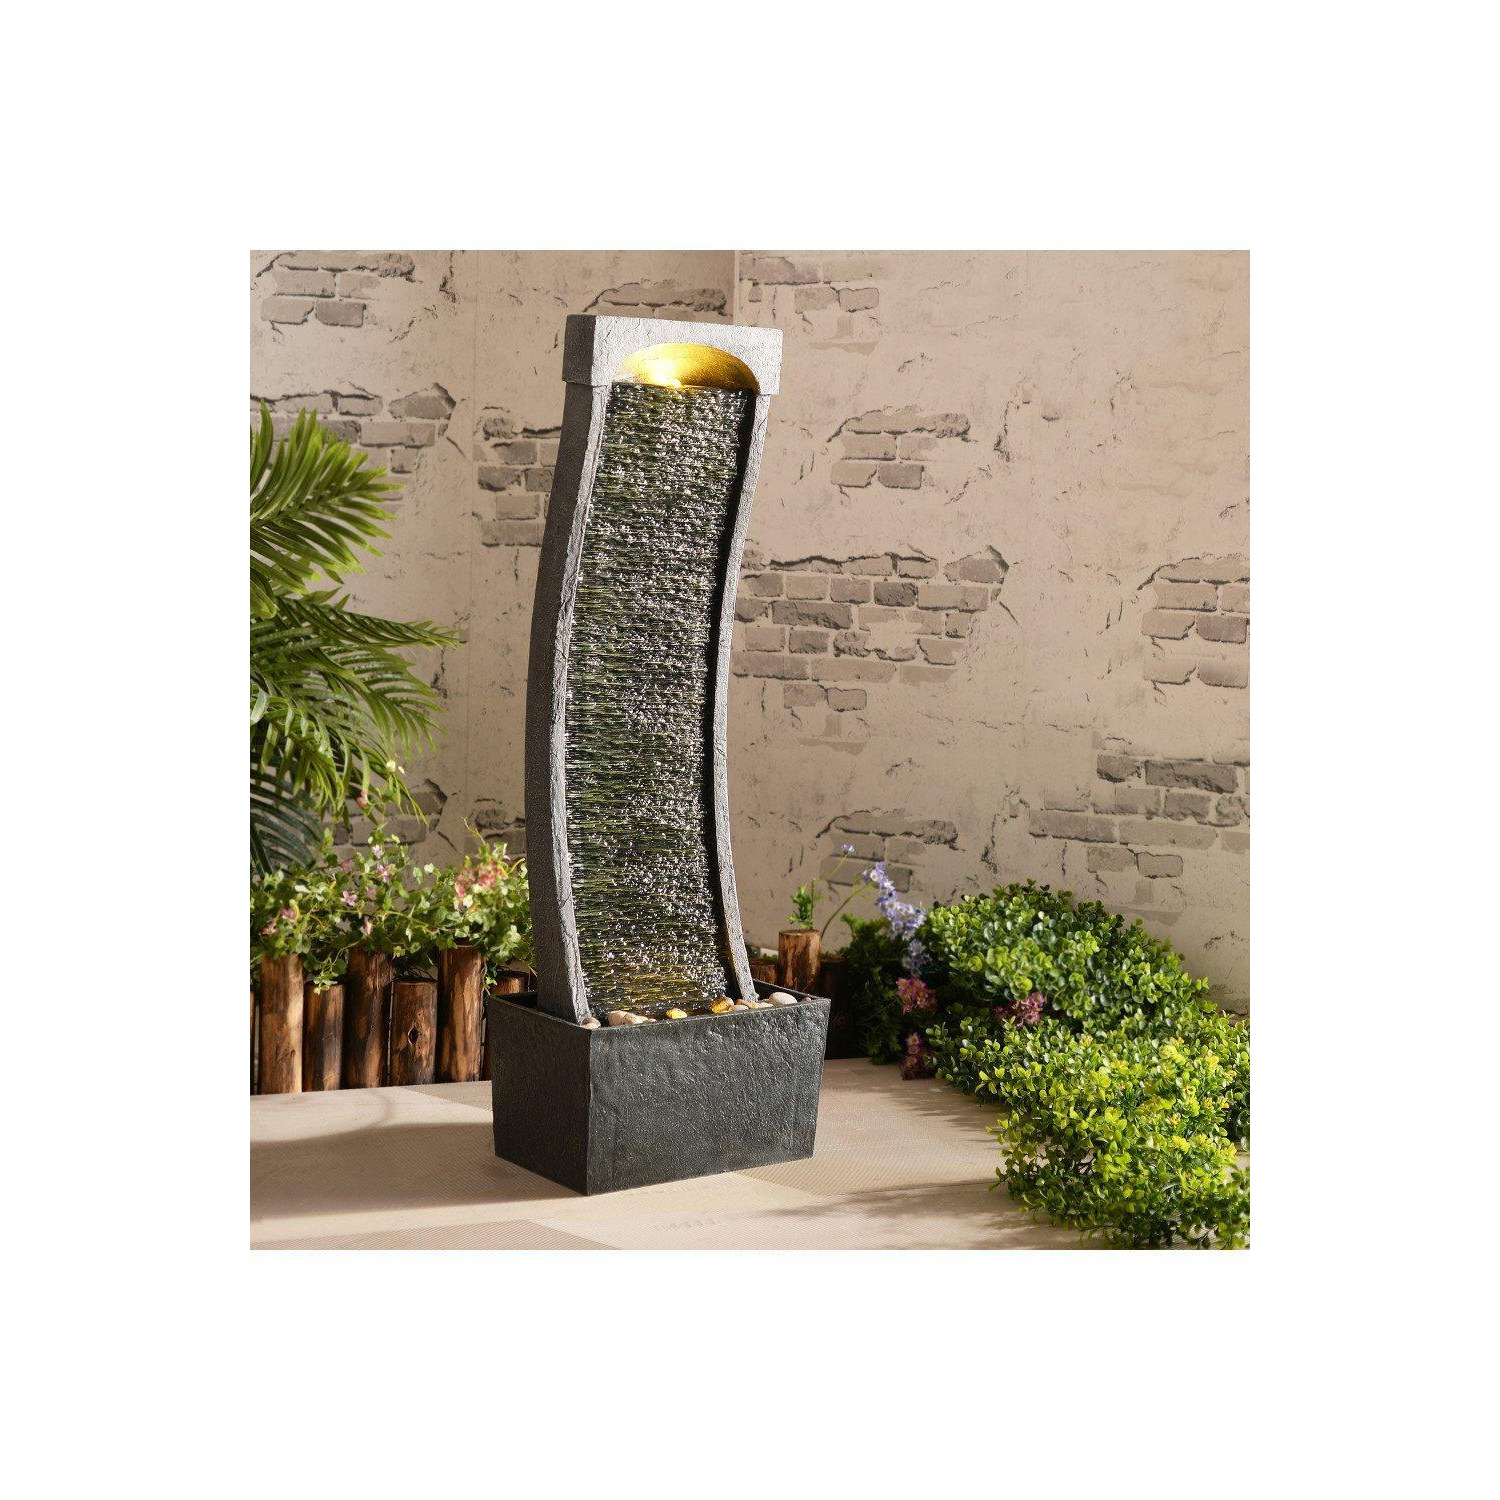 Garden Water Feature, Large Outdoor Curved Water Fountain - image 1